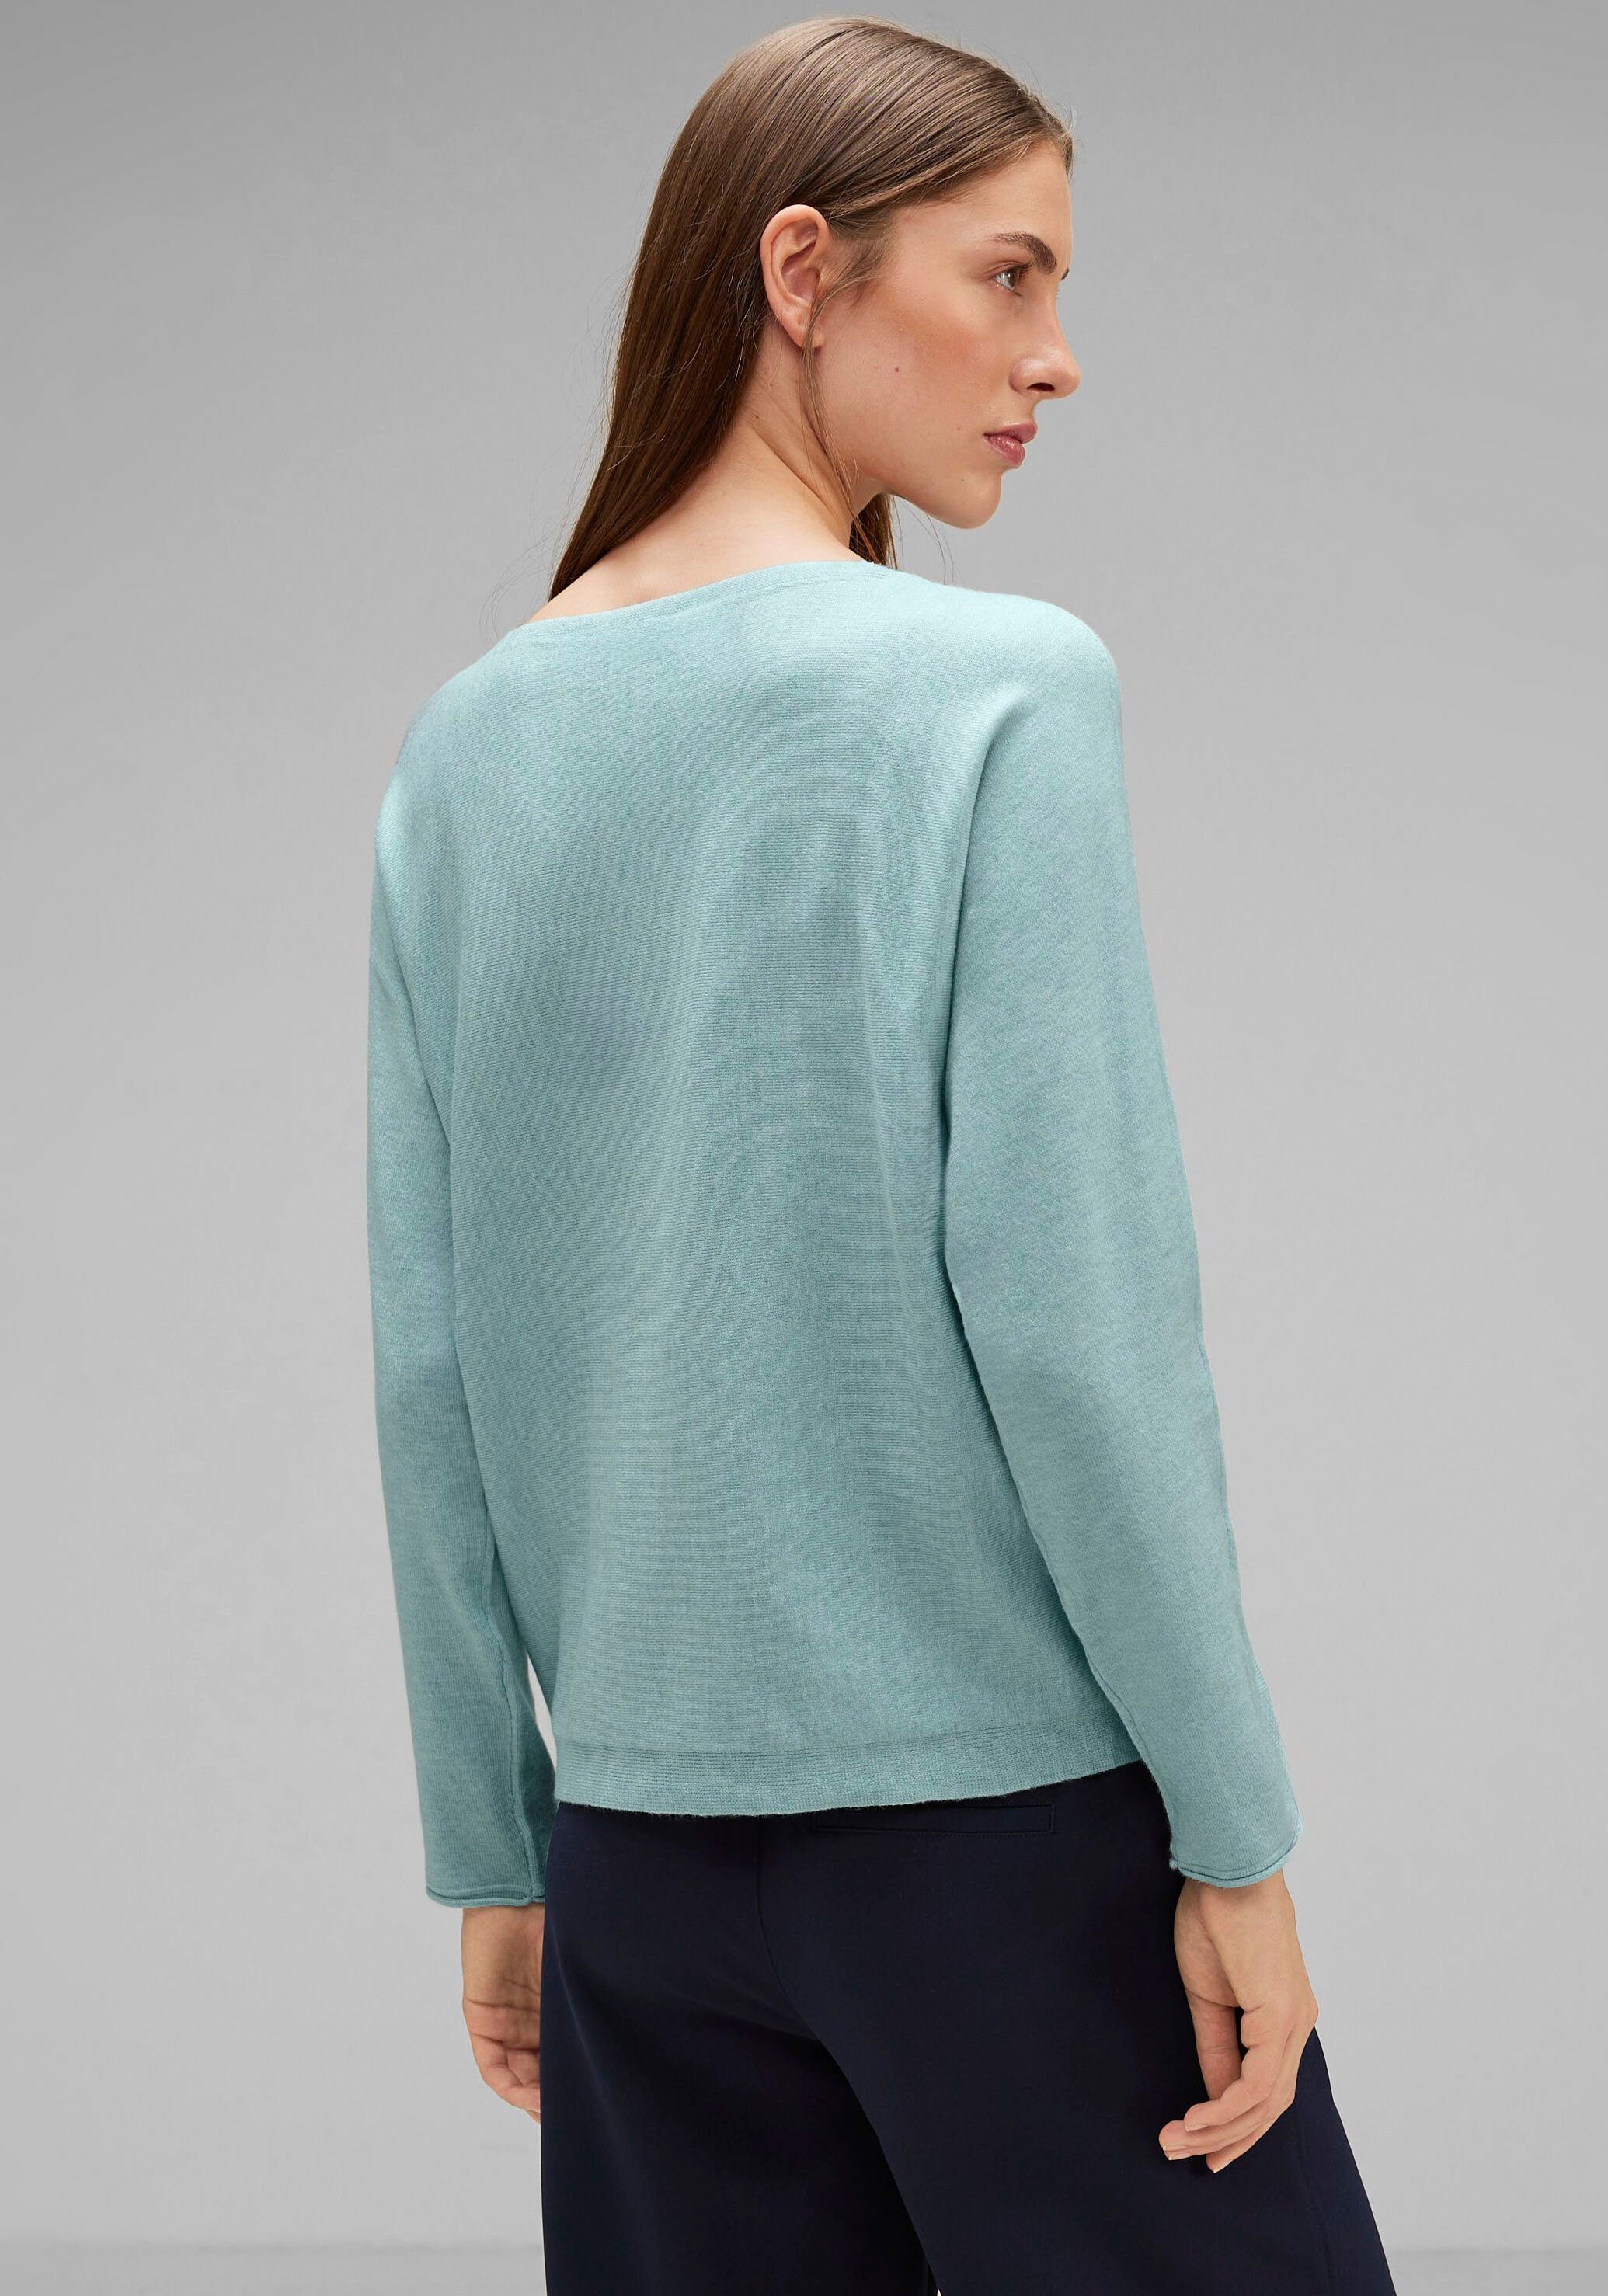 ONE mint STREET in iced Unifarbe Strickpullover